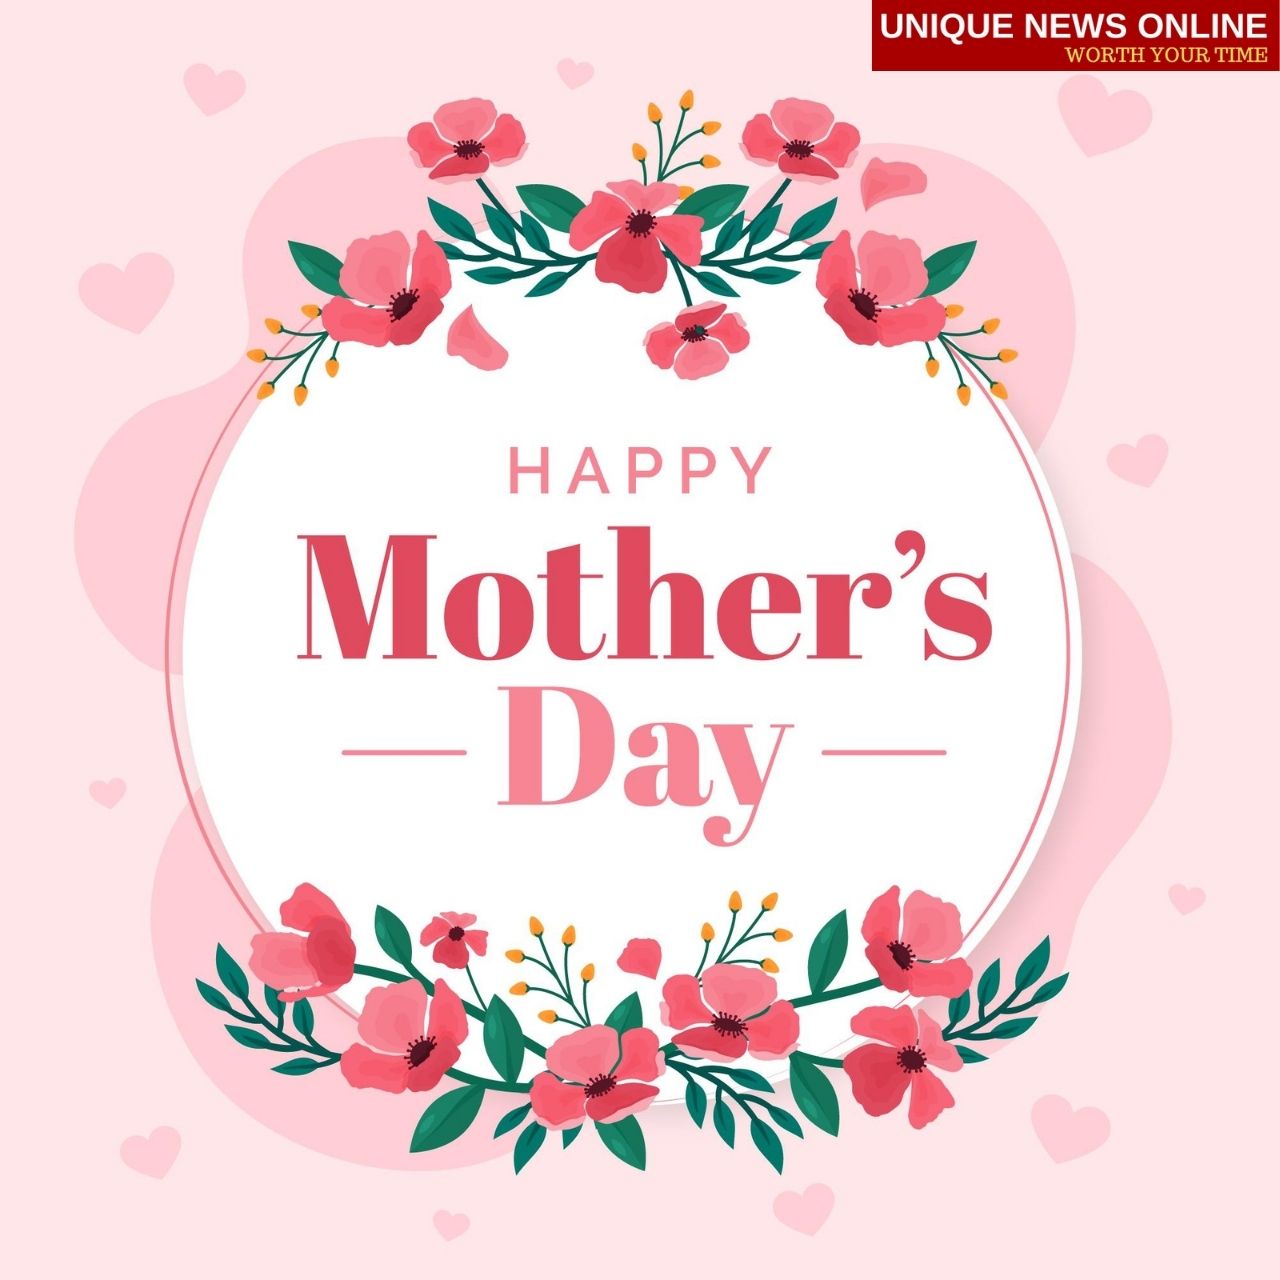 Mother's Day 2021 Images